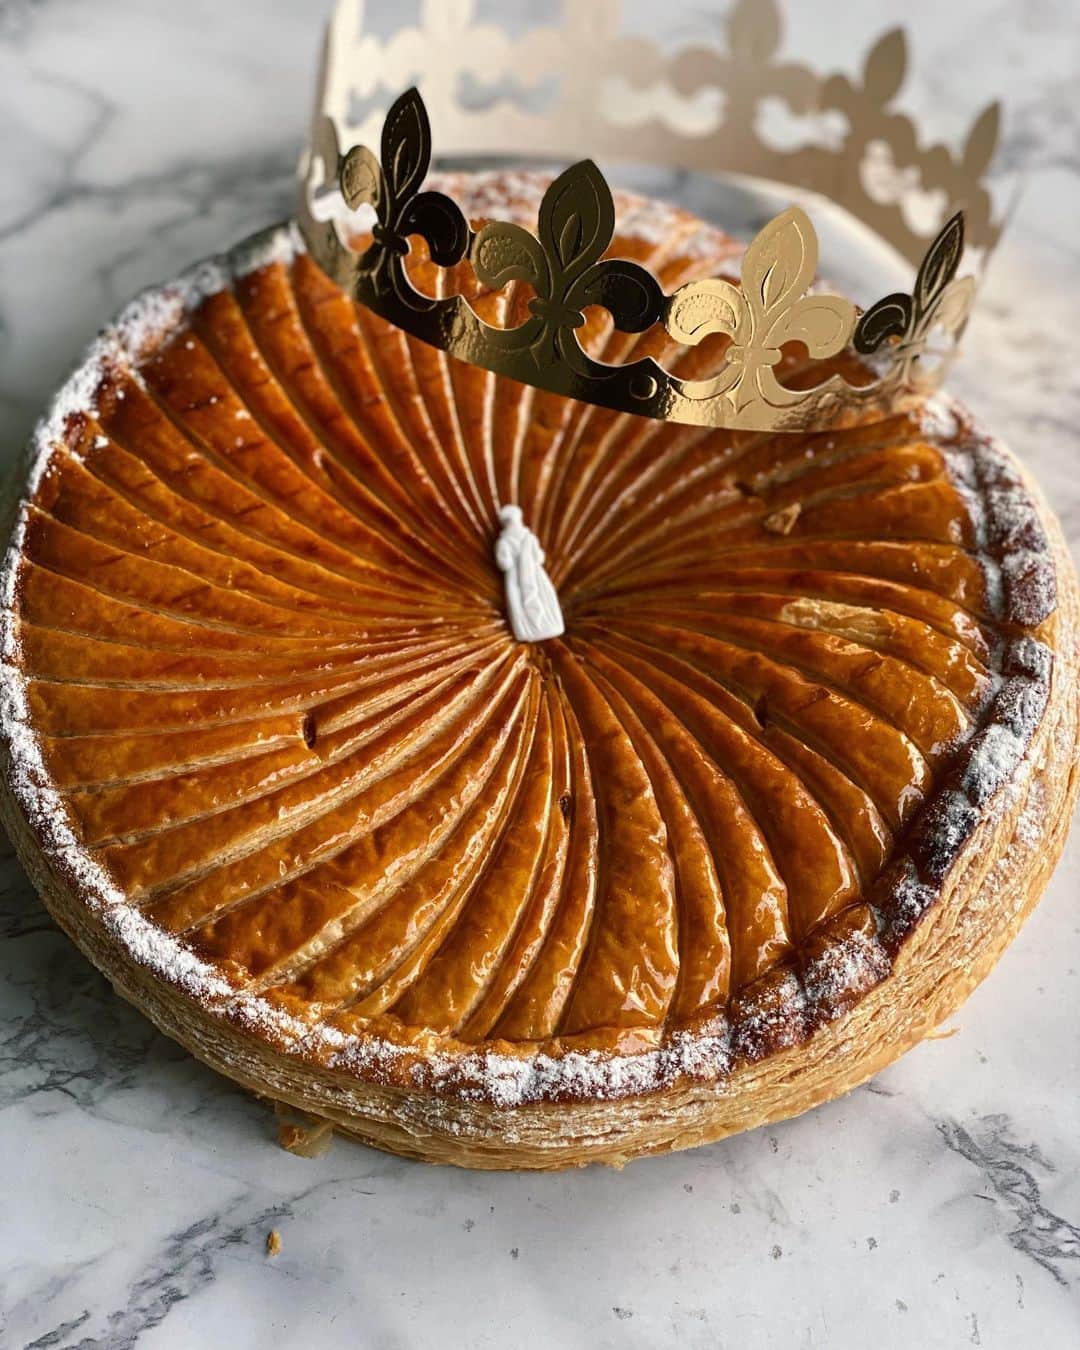 Antonietteのインスタグラム：「The galette des rois, celebrating Epiphany, the day the Three Kings (les rois) visited the infant Jesus, is baked throughout January in France. I was so happy to be able to get it in here in San Diego from  @patisseriebonjour !  The galette is made of puff pastry filled with a frangipani filling with a little charm (fève) baked into it. If you get the charm you get the crown and the right to be king or queen for the day! No need for me to play the game as I already have a crown...on my tooth. 🦷 👑😆 Order ahead of time for pickup or check them out at the North Park Farmers Market. They also have wonderful pastries and croissants!🥐😋」